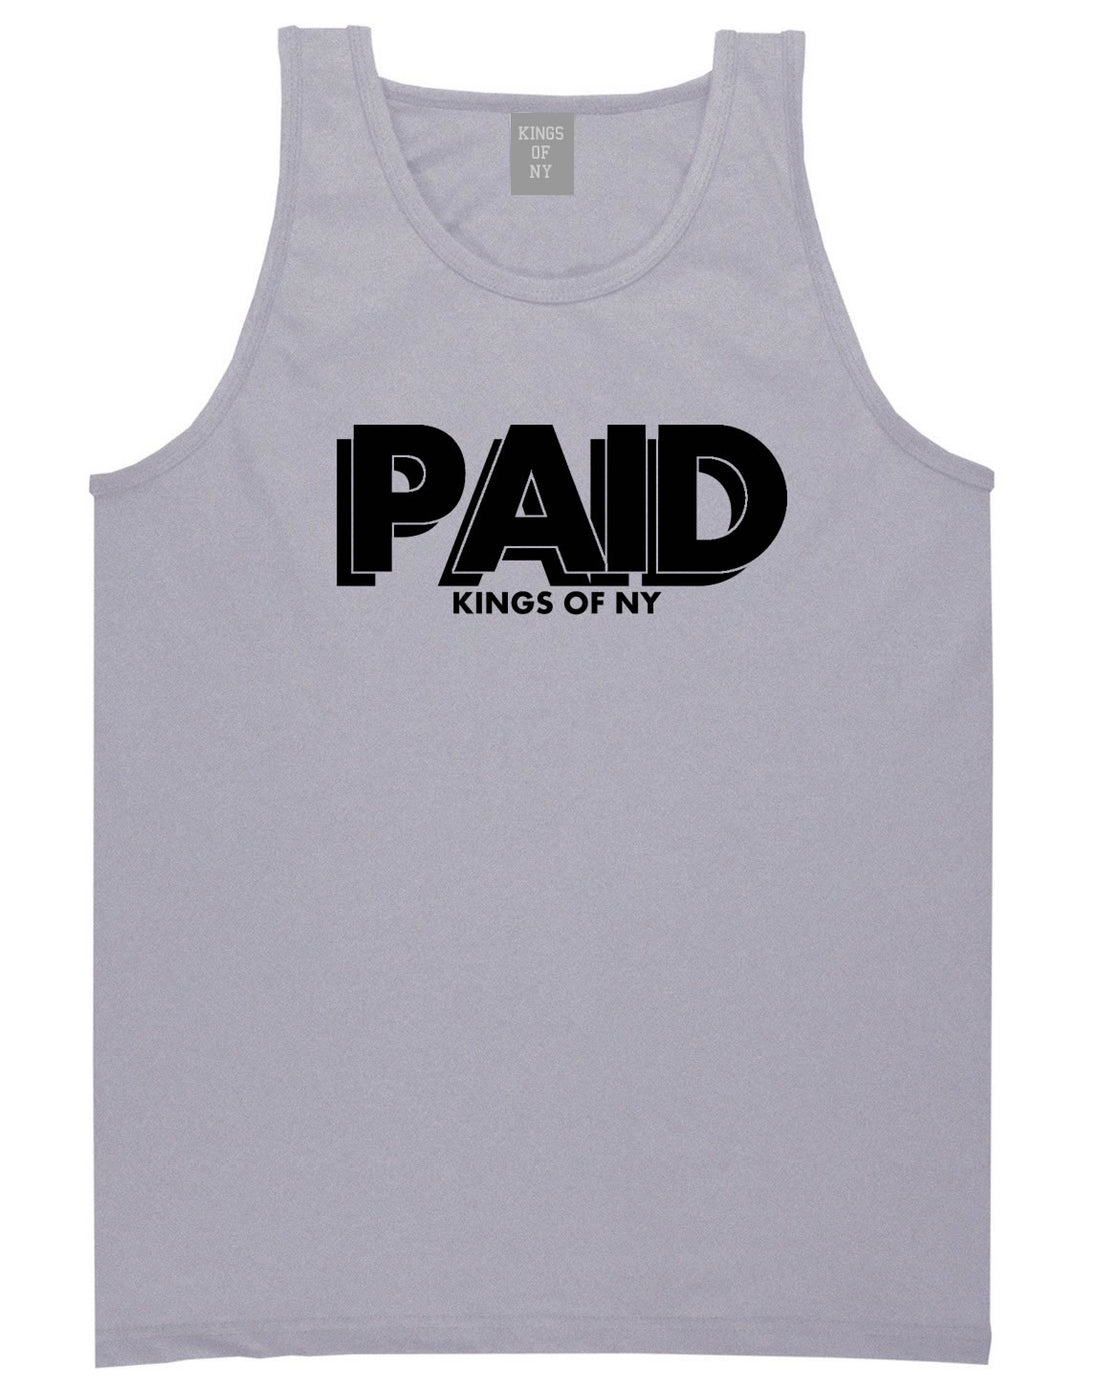 PAID Kings Of NY W15 Tank Top in Grey By Kings Of NY